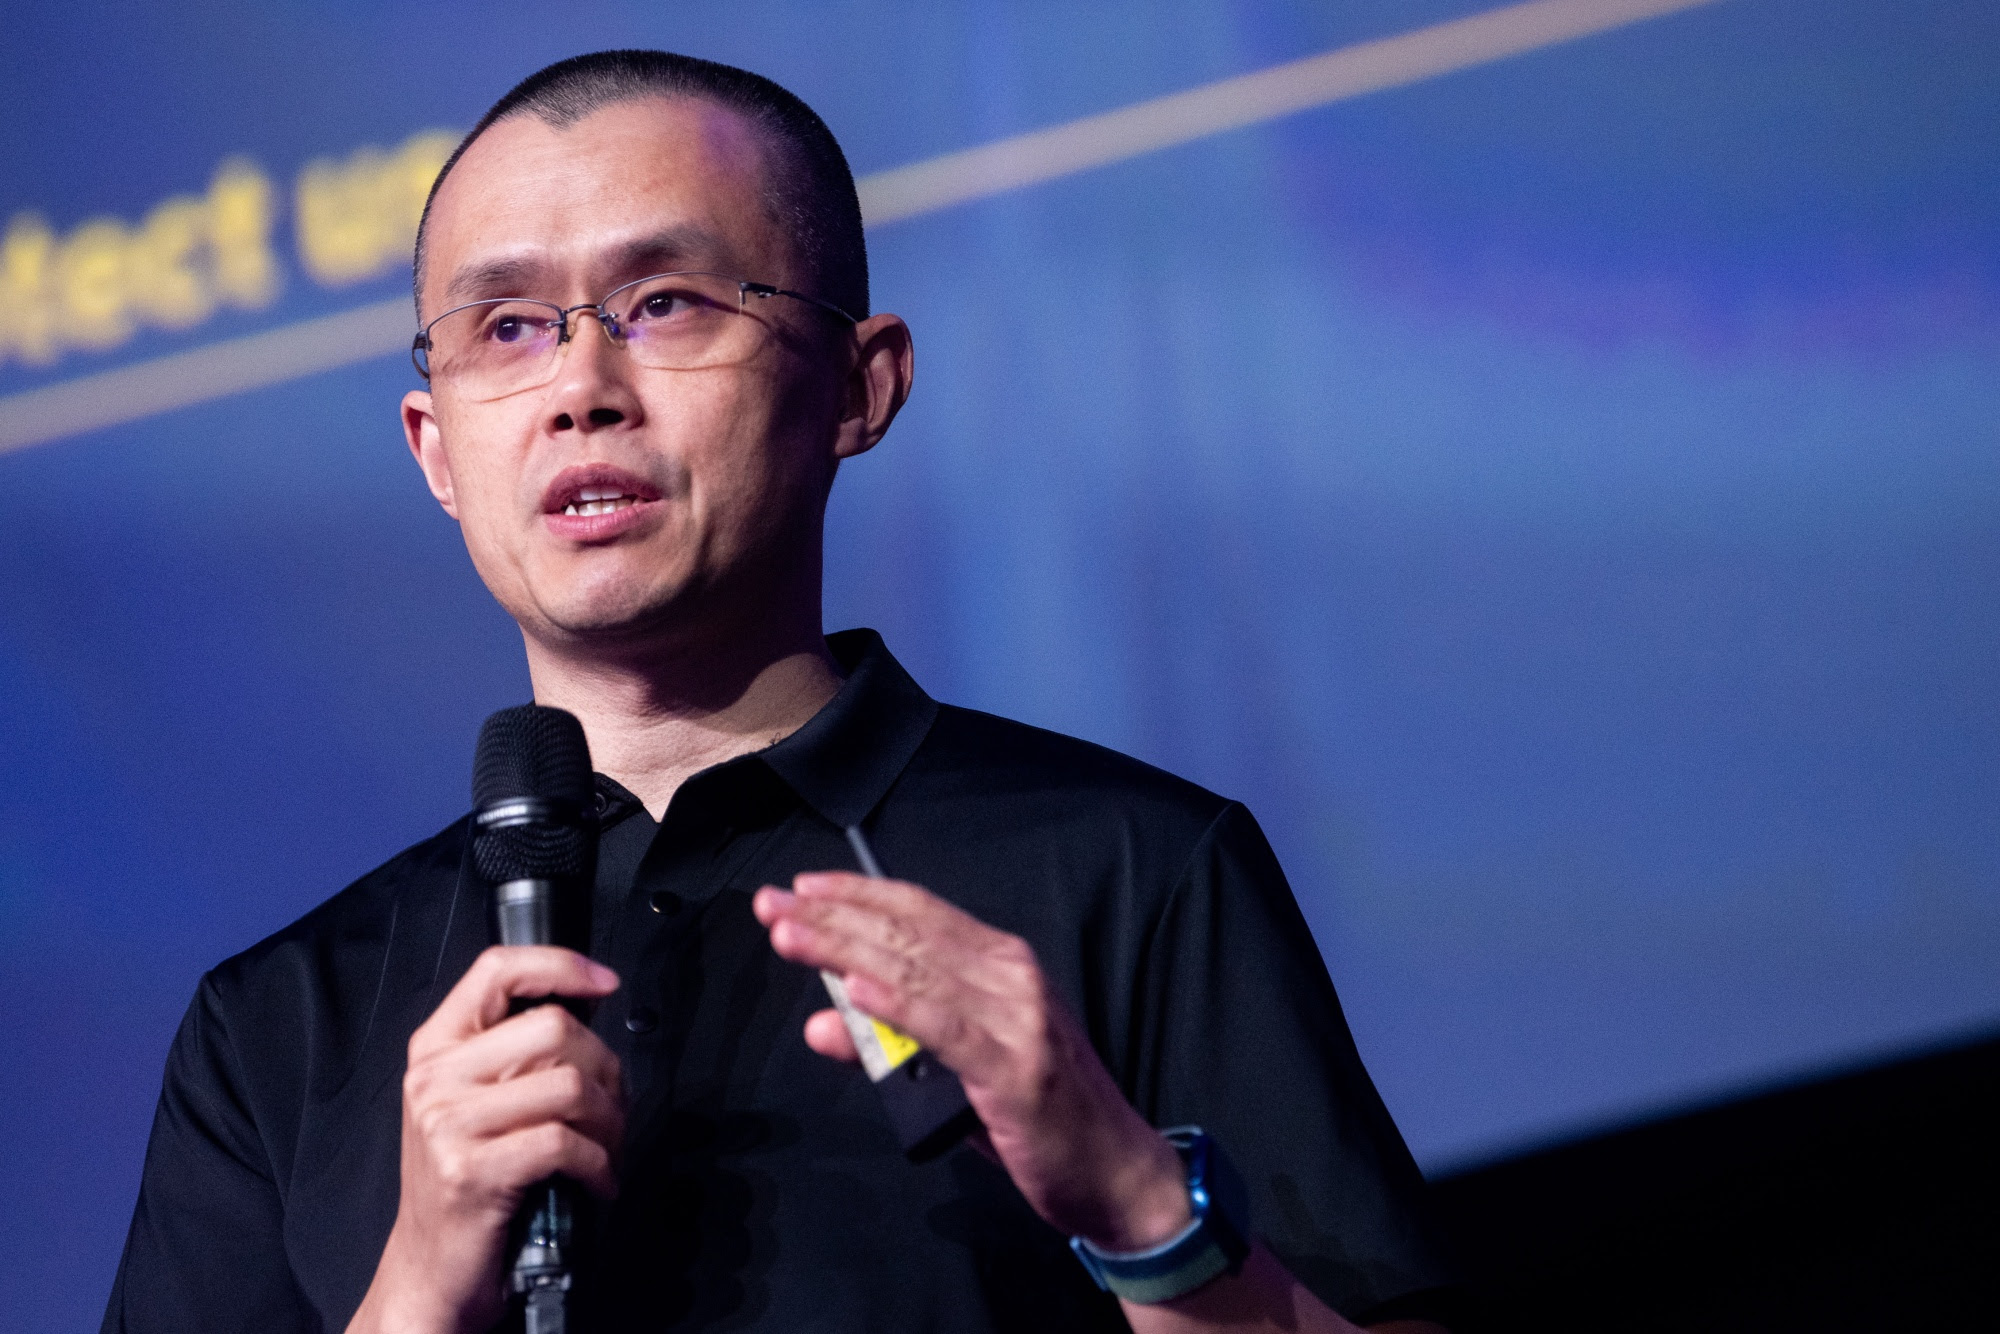 Binance Launches $1 Billion Raise for Crypto 'Recovery Fund', Could Buy FTX Assets